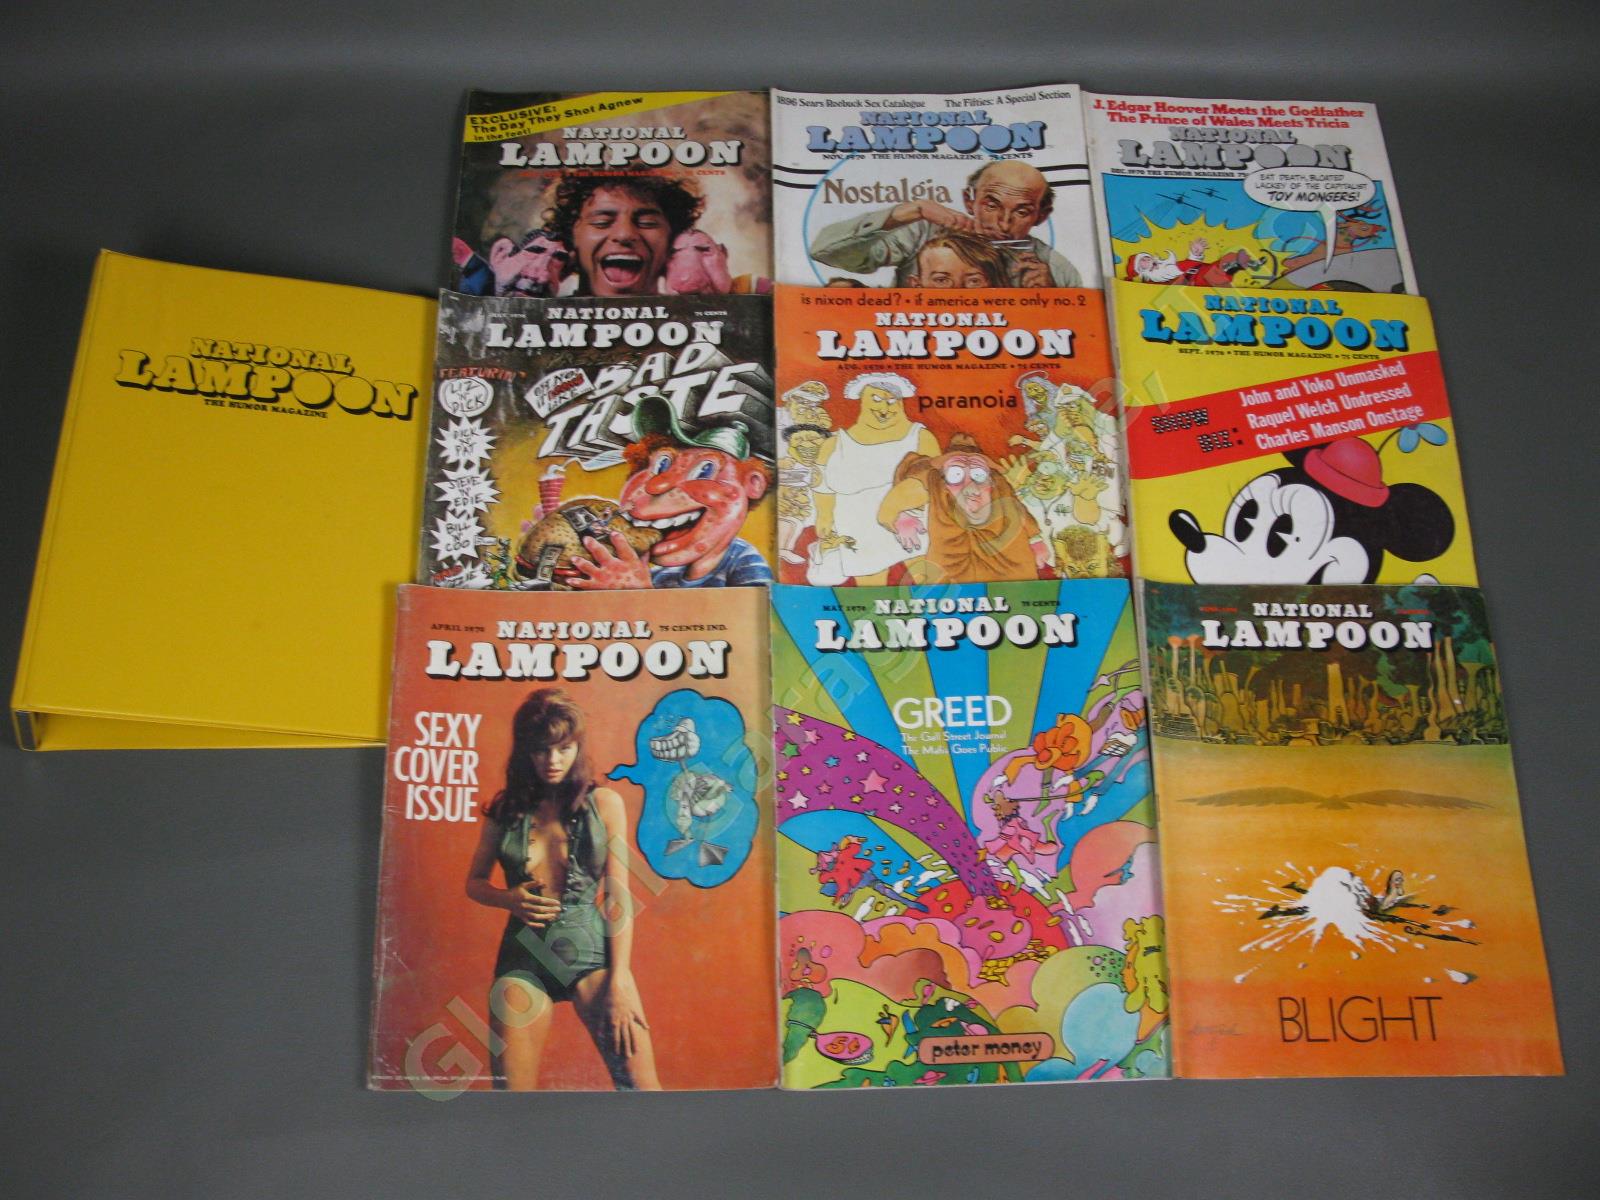 COMPLETE 9 Vintage 1970 National Lampoon Humor Magazine April #1 FIRST ISSUE Set